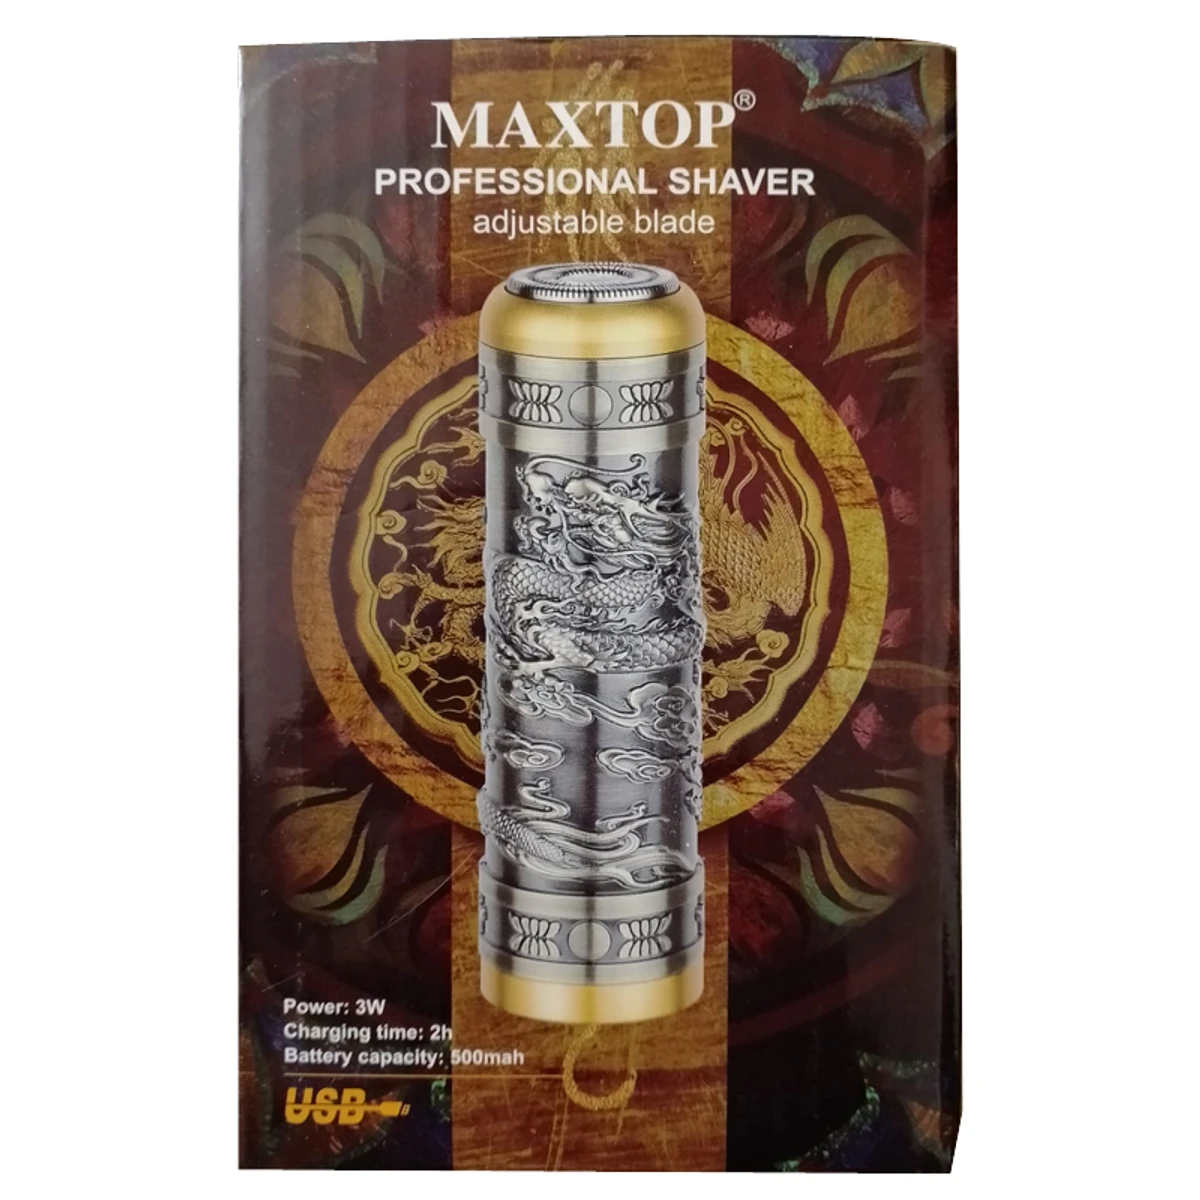 Maxtop Professional Shaver